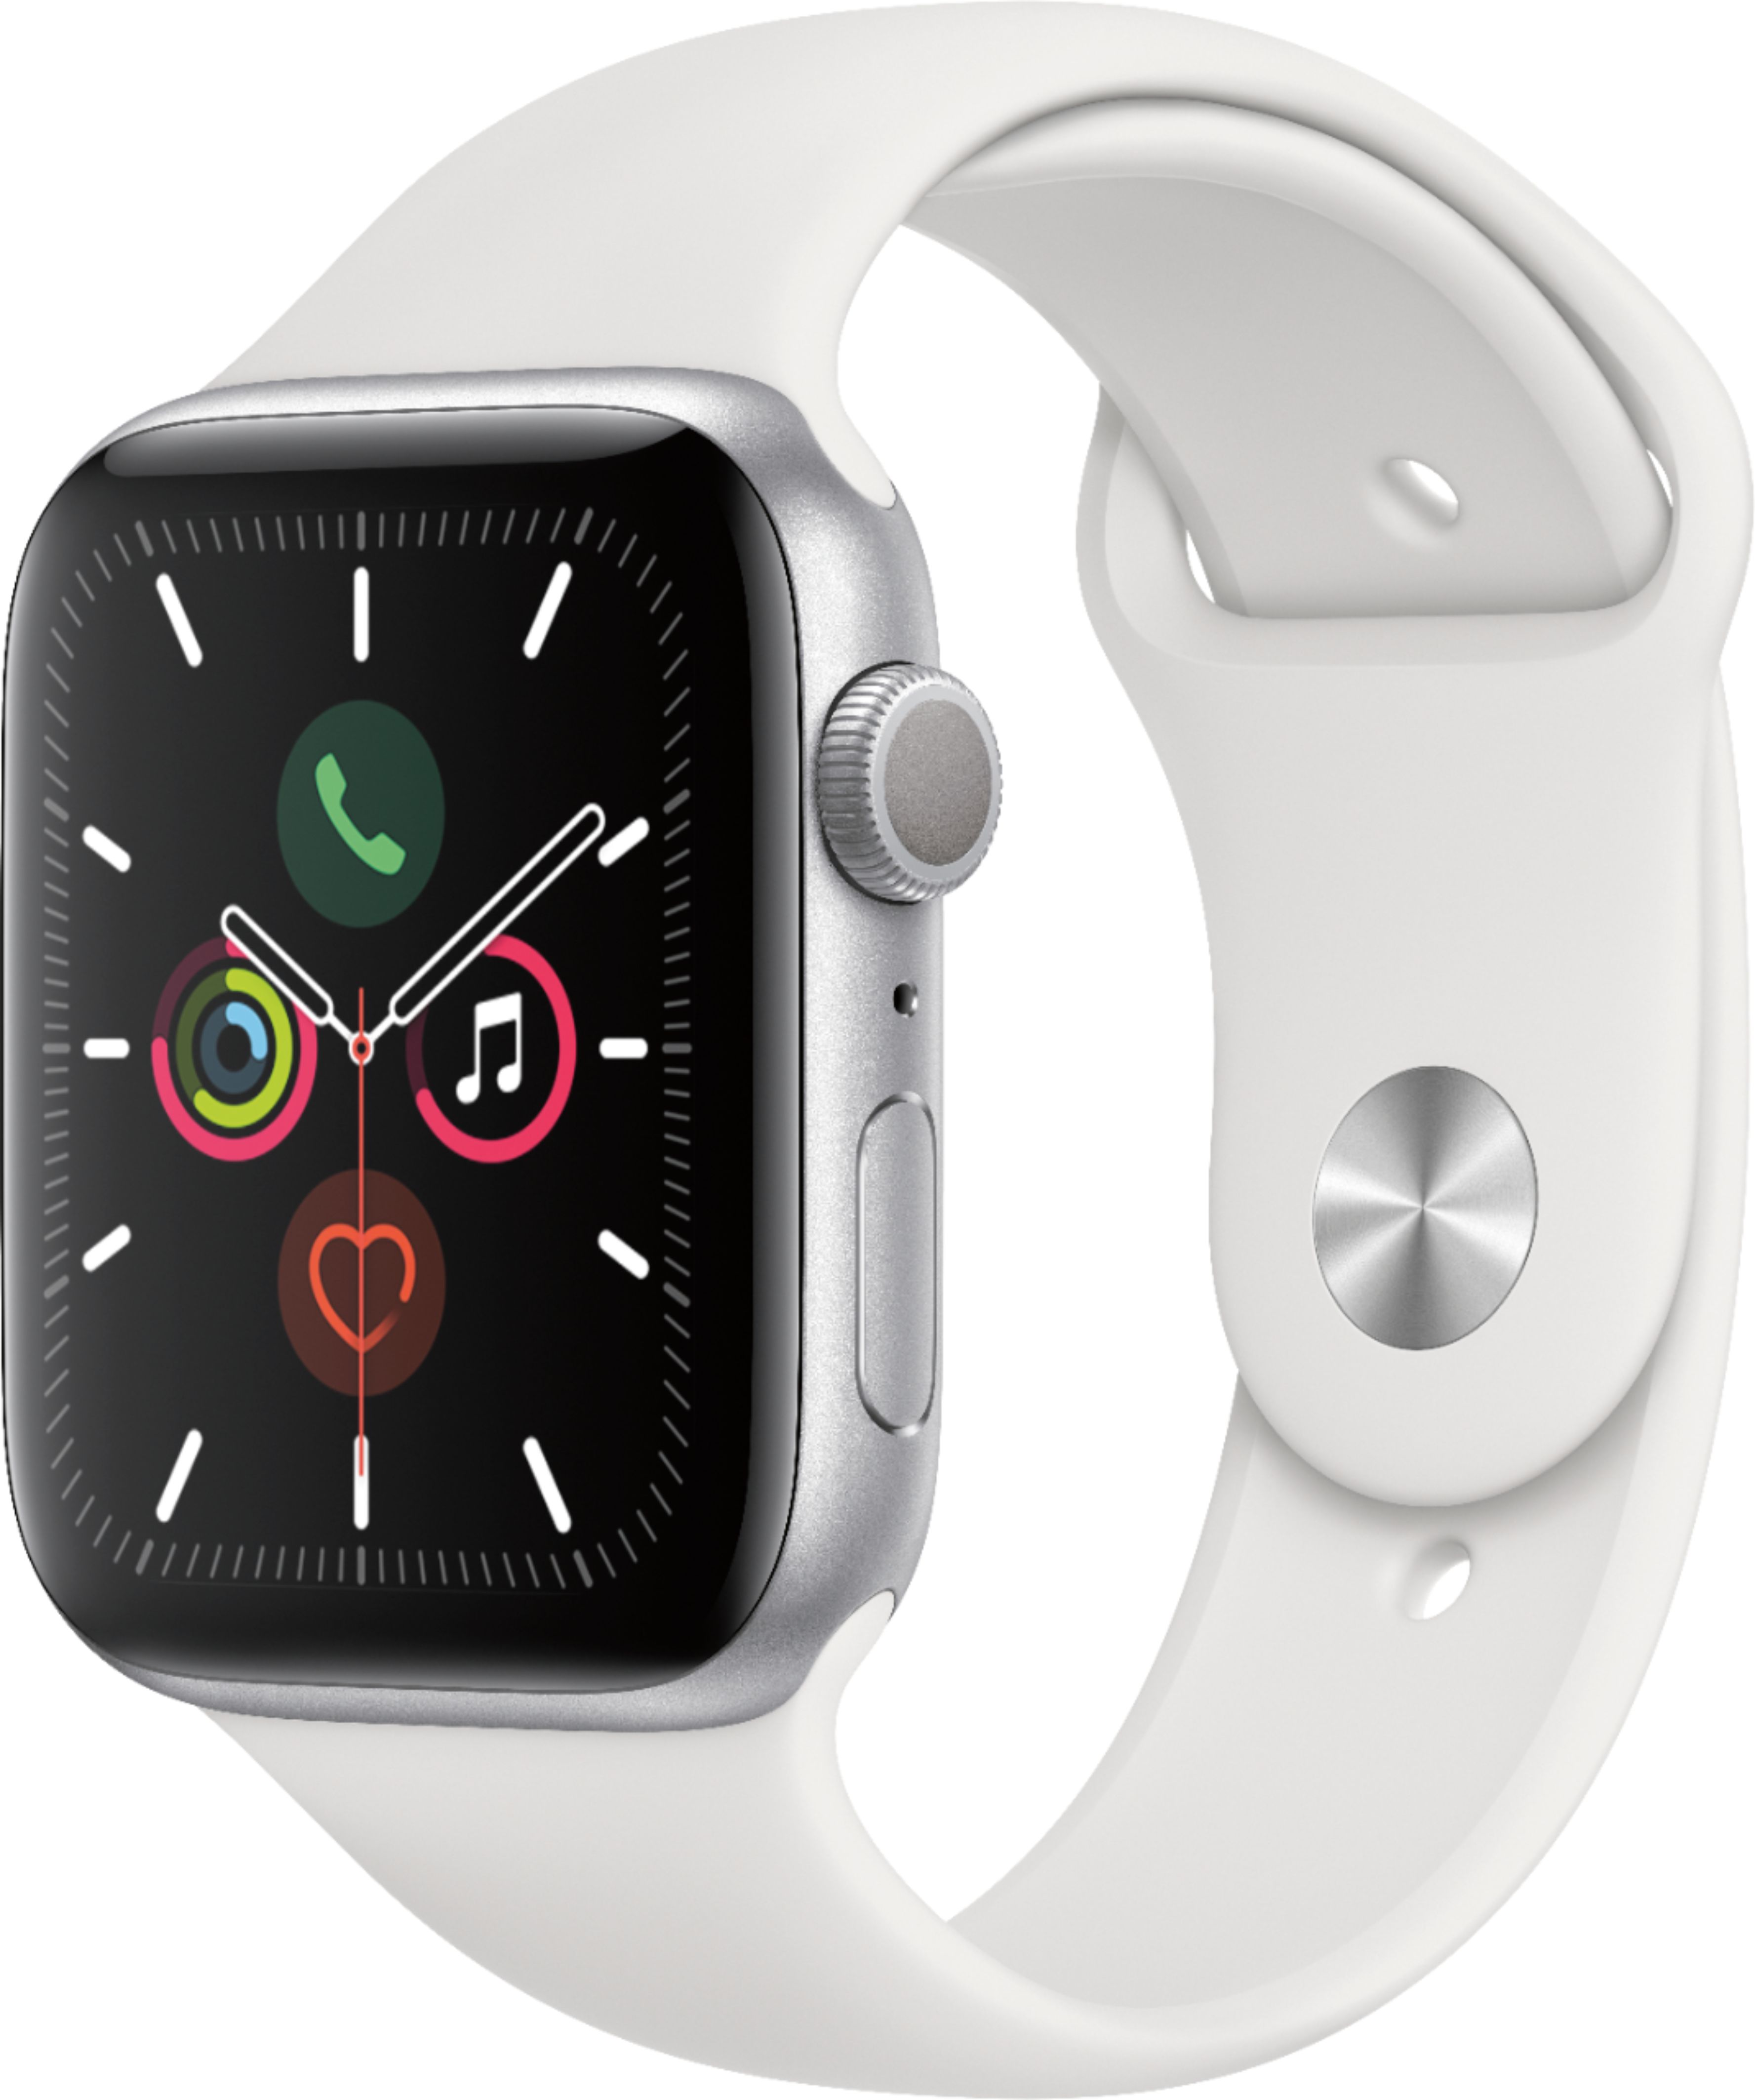 Metode skovl Af Gud Apple Watch Series 5 (GPS) 44mm Aluminum Case with White Sport Band Silver  Aluminum MWVD2LL/A - Best Buy